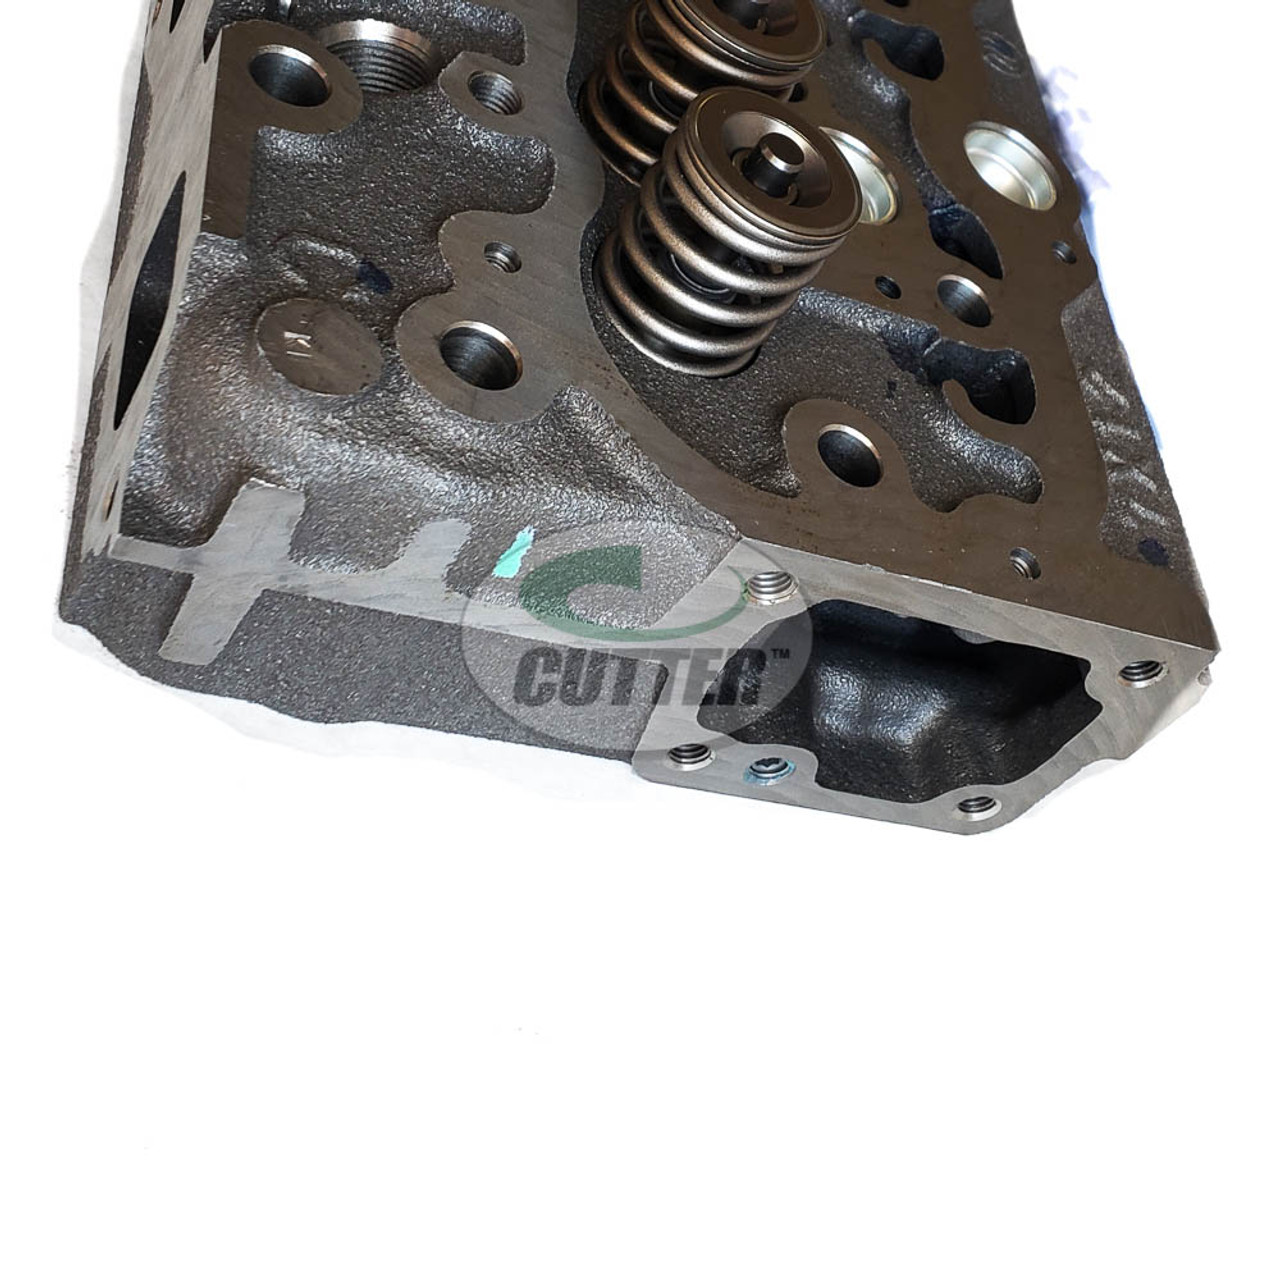 New Cylinder Head Kit - Replaces Toro 108-7055